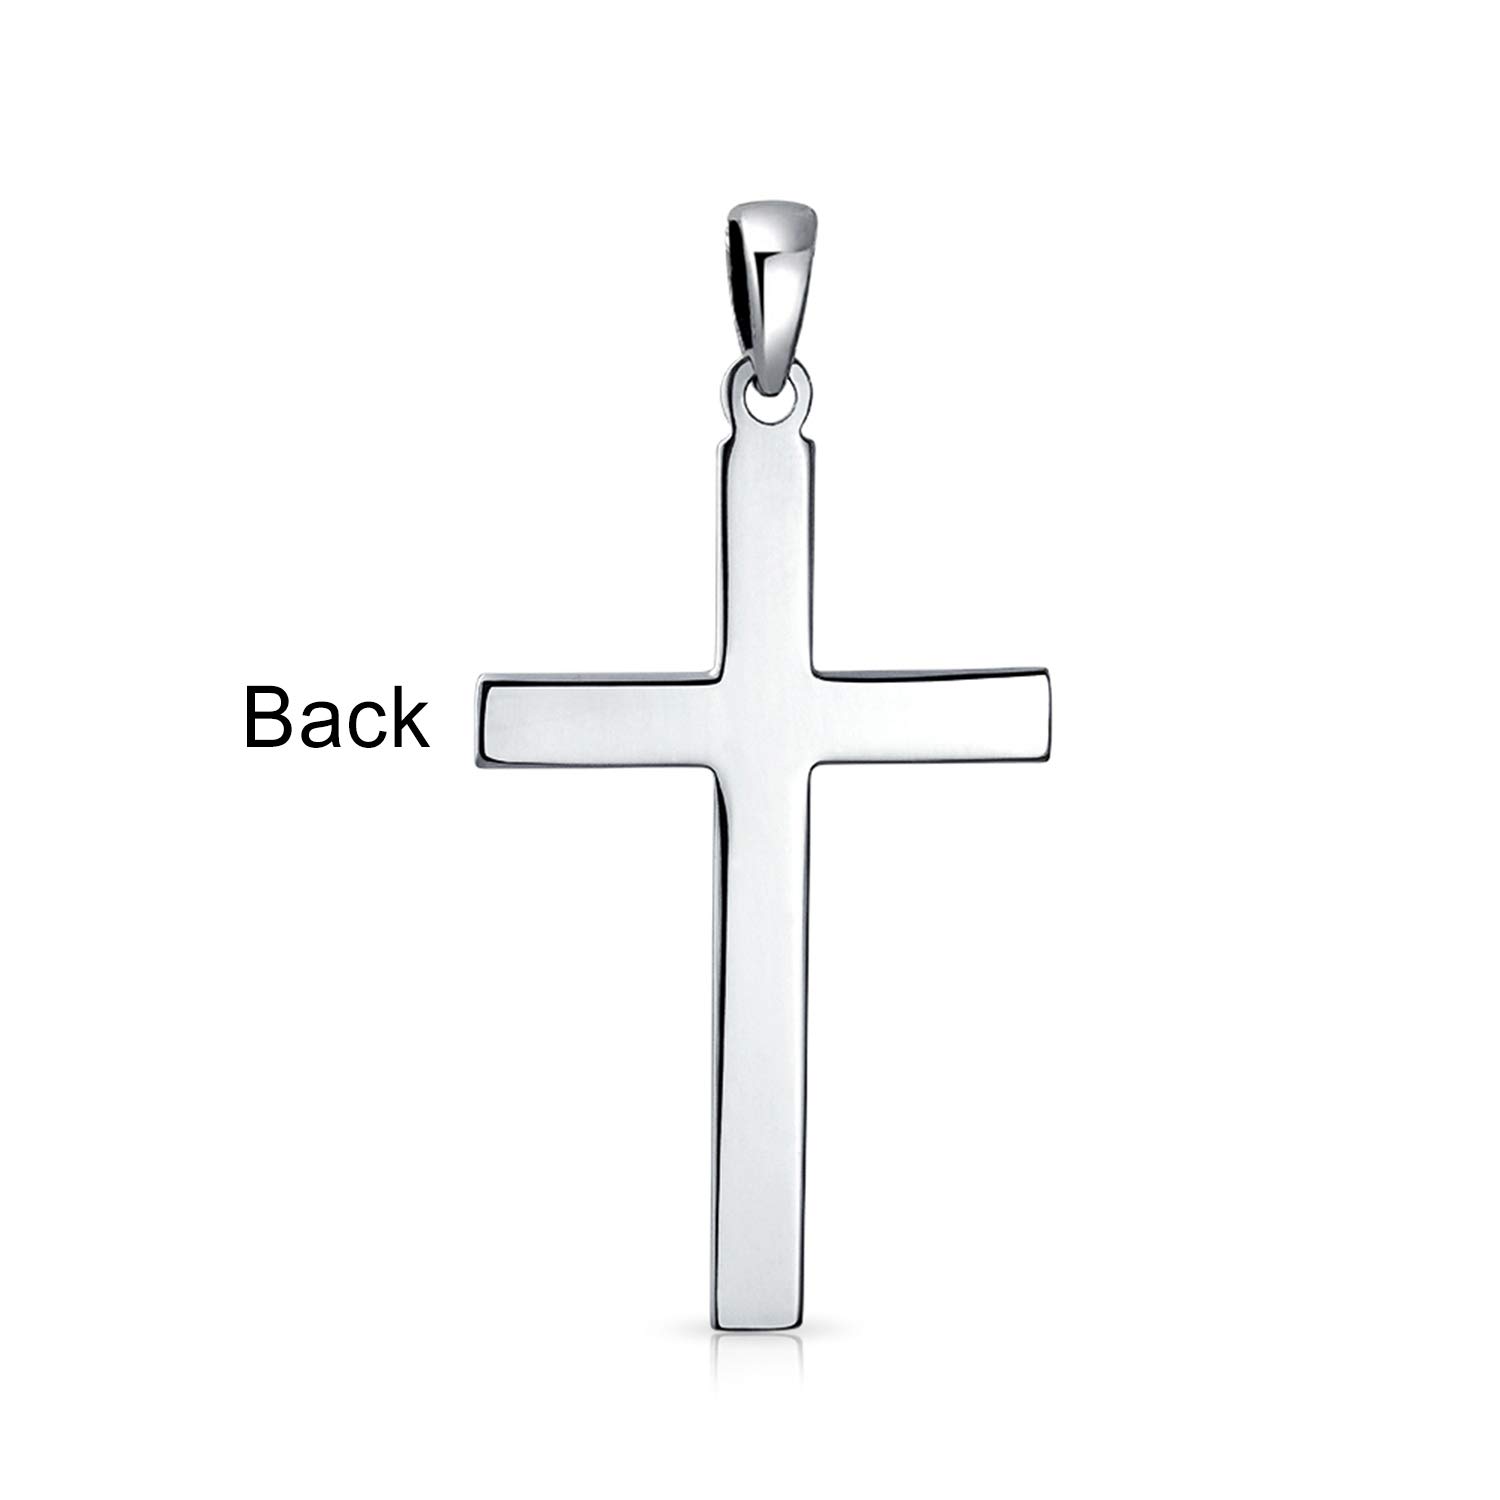 Unisex Large Personalize Engravable Traditional Religious Spiritual Plain Simple Flat Cross Pendant Necklace For Women Teen Men Polished Solid .925 Sterling Silver 2